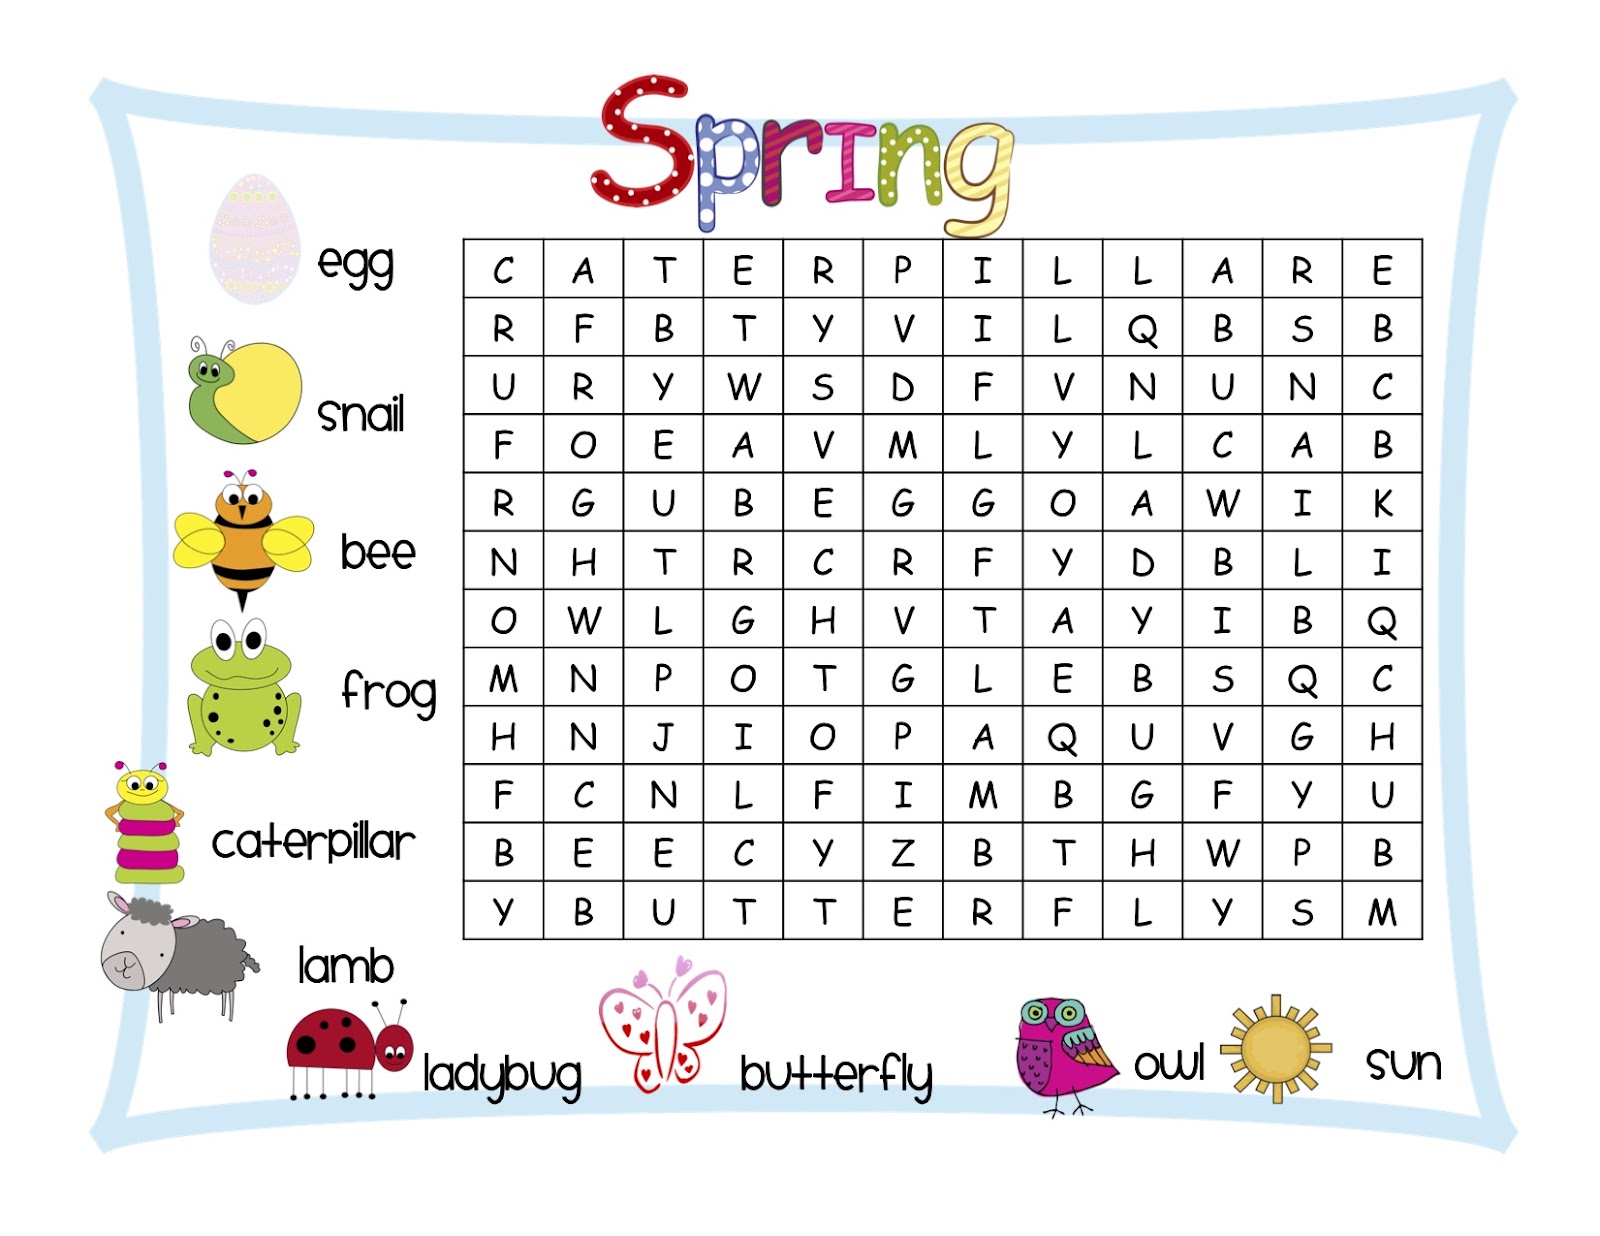 1st-grade-word-search-best-coloring-pages-for-kids